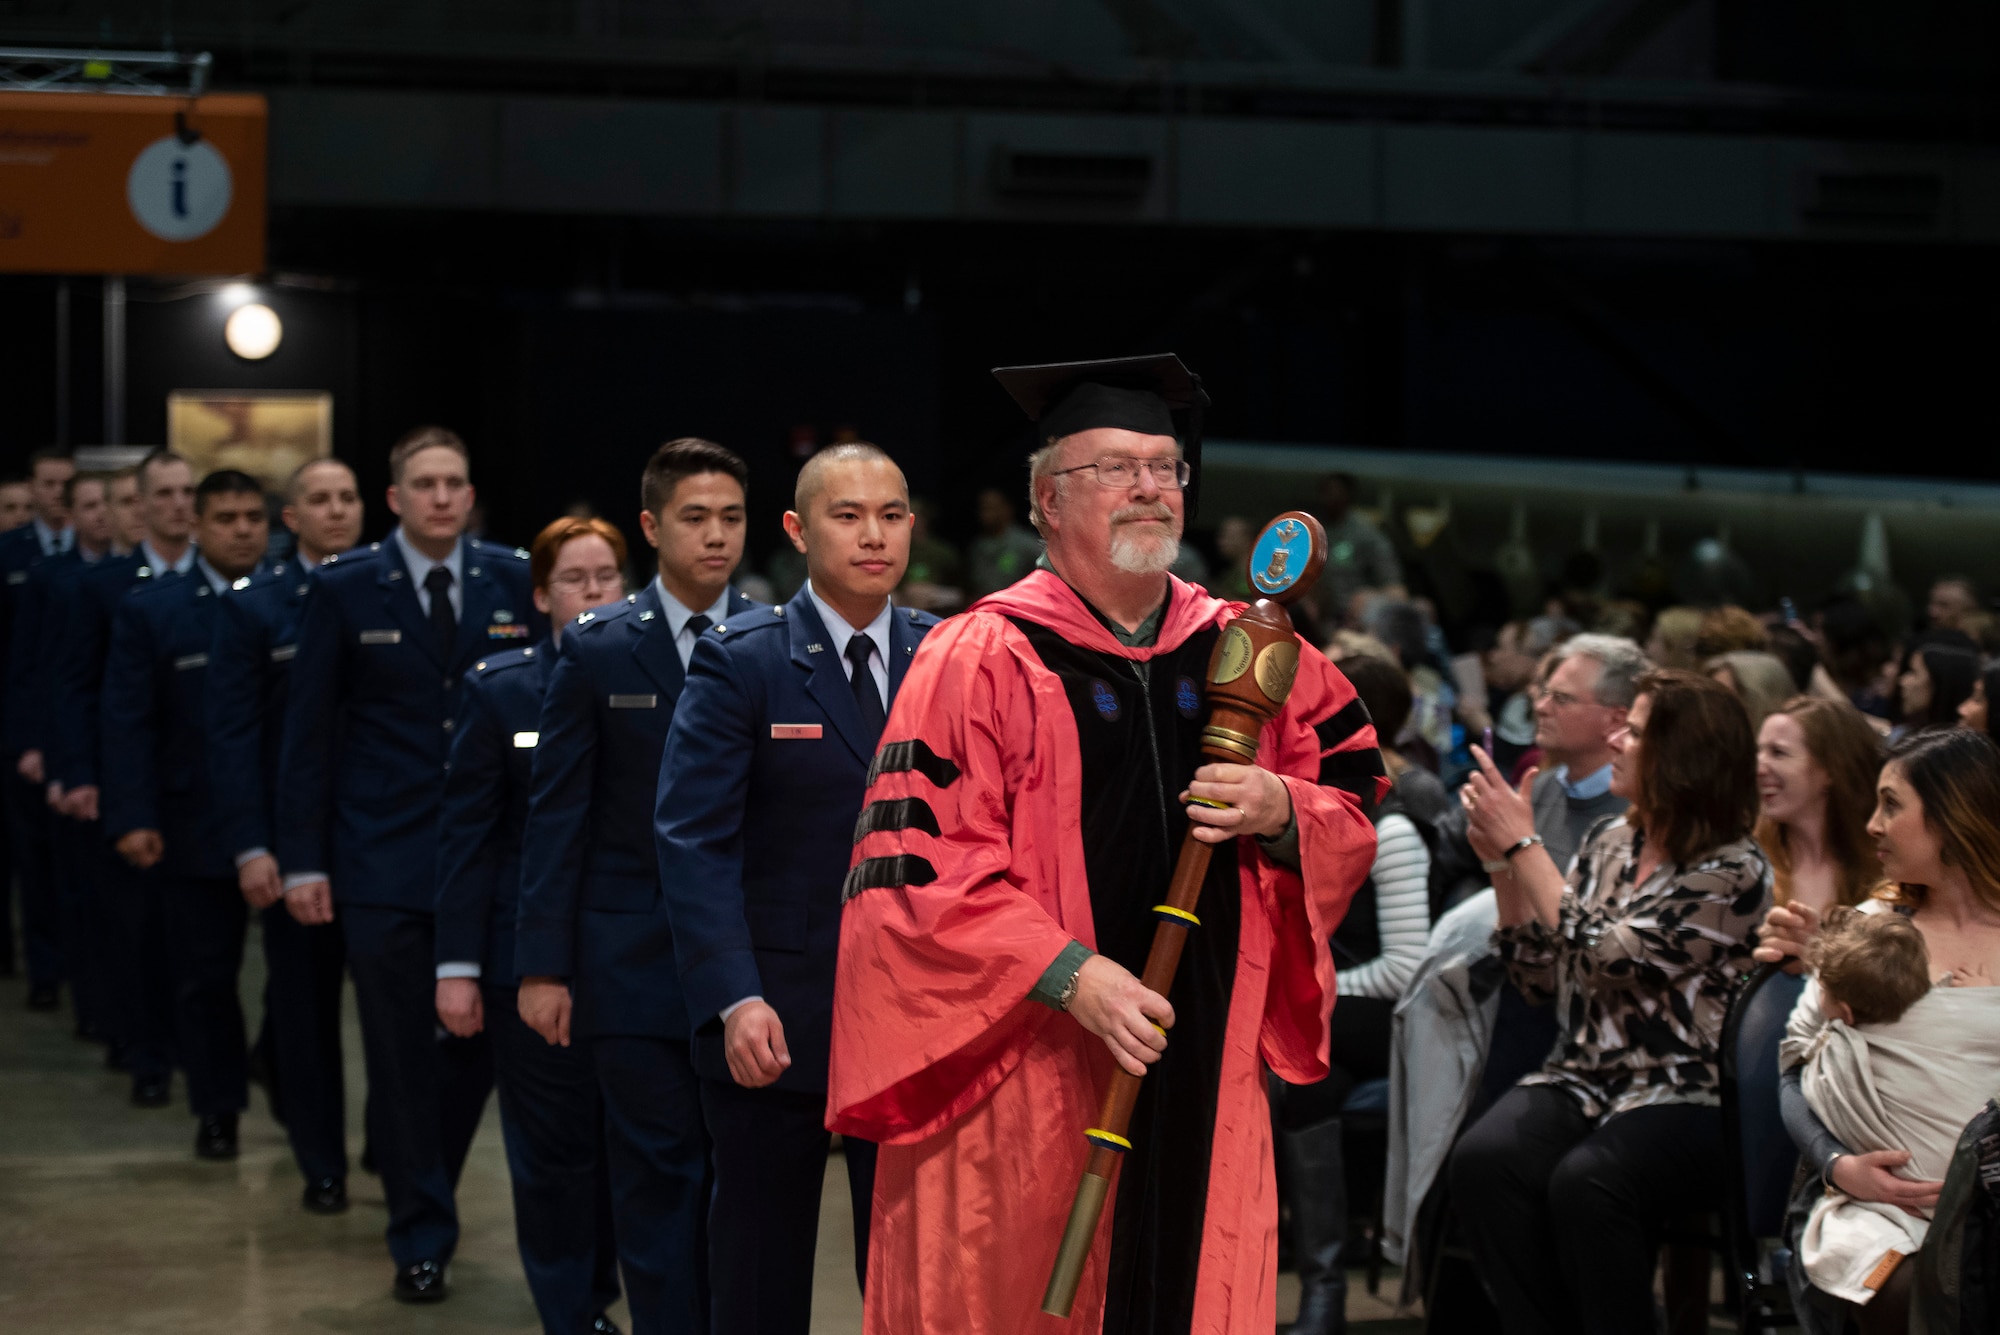 Anthony Palazotto, grand marshal, leads 2nd Lt. Kevin Lin, the other graduates and faculty into the Air Force Institute of Technology commencement ceremony March 21, 2019, at the National Museum of the U.S. Air Force, Wright-Patterson Air Force Base, Ohio. Due to COVID-19 concerns, a commencement ceremony for 2020 graduates was not held. (U.S. Air Force photo by R.J. Oriez)